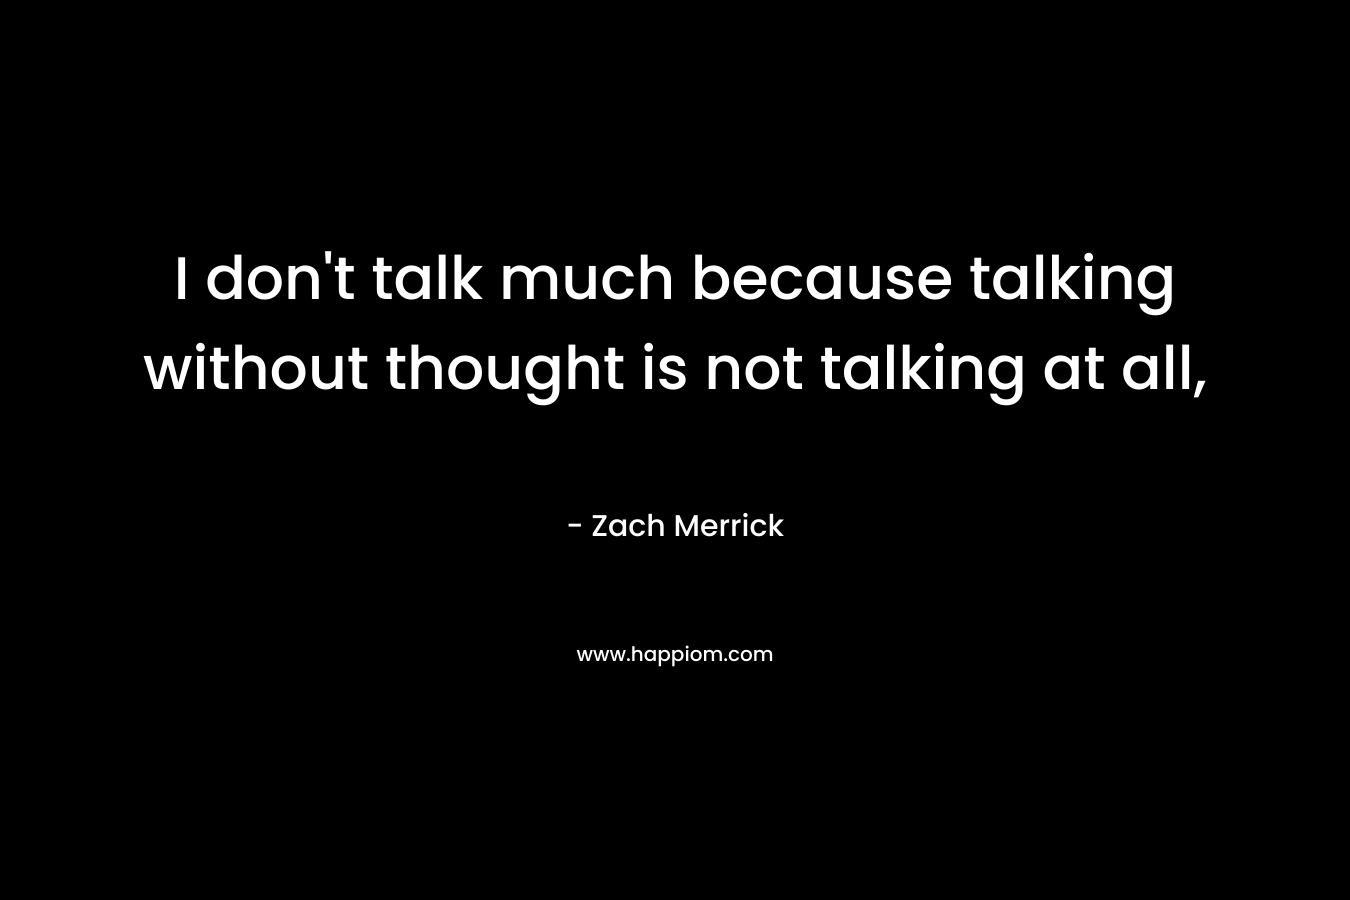 I don't talk much because talking without thought is not talking at all,